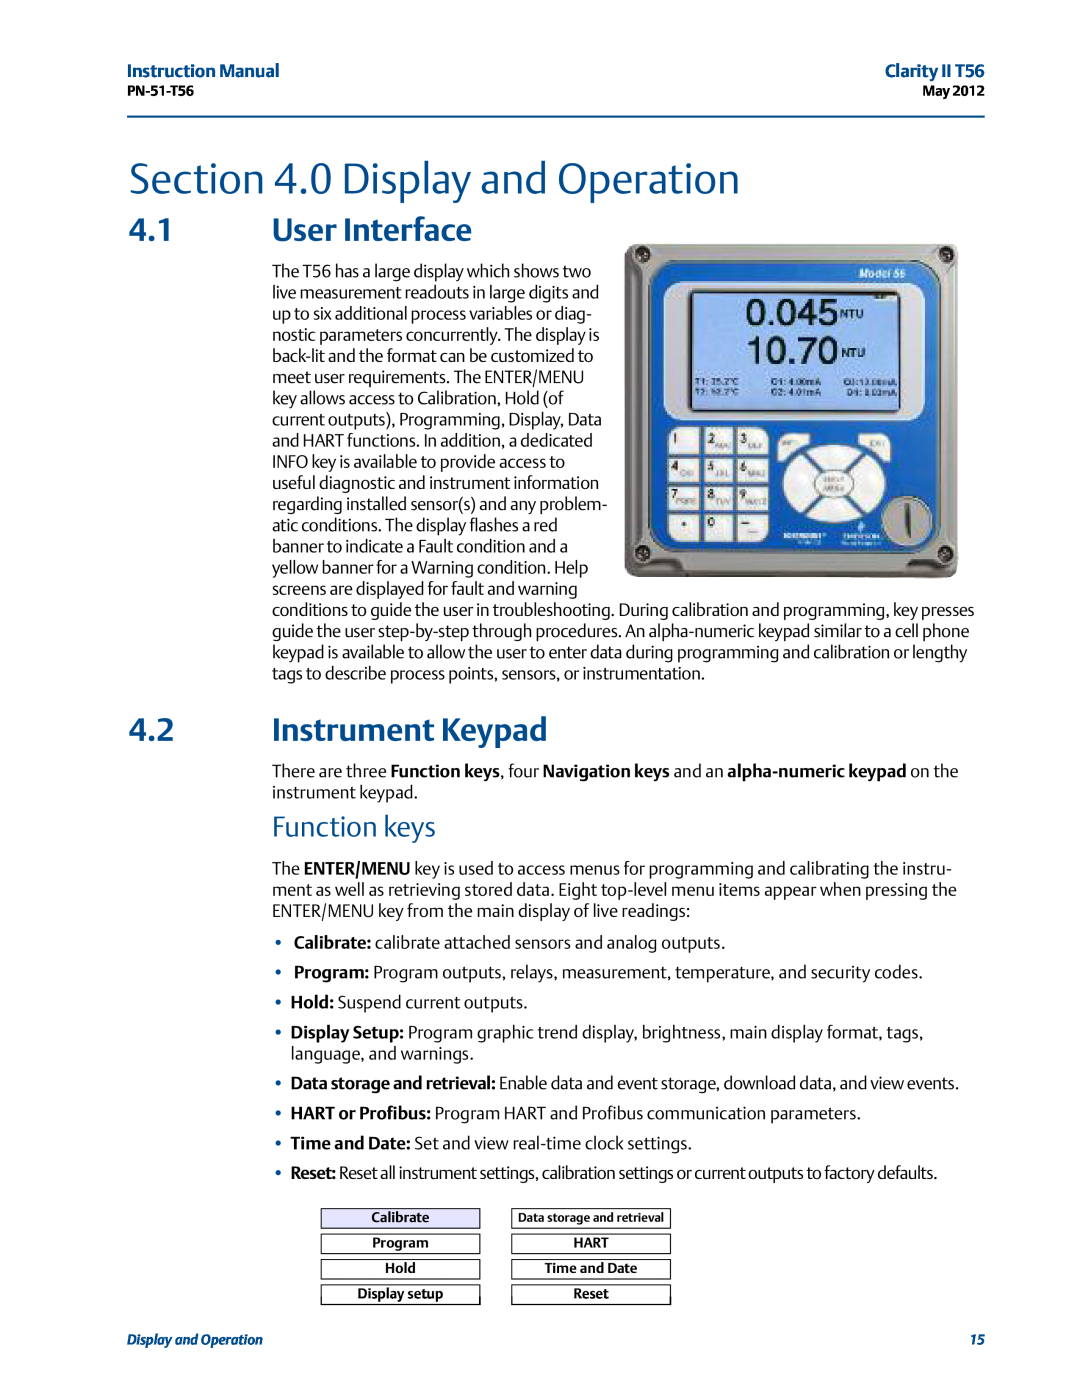 Emerson PN-51-T56 instruction manual 0 Display and Operation, User Interface, Instrument Keypad, Function keys 